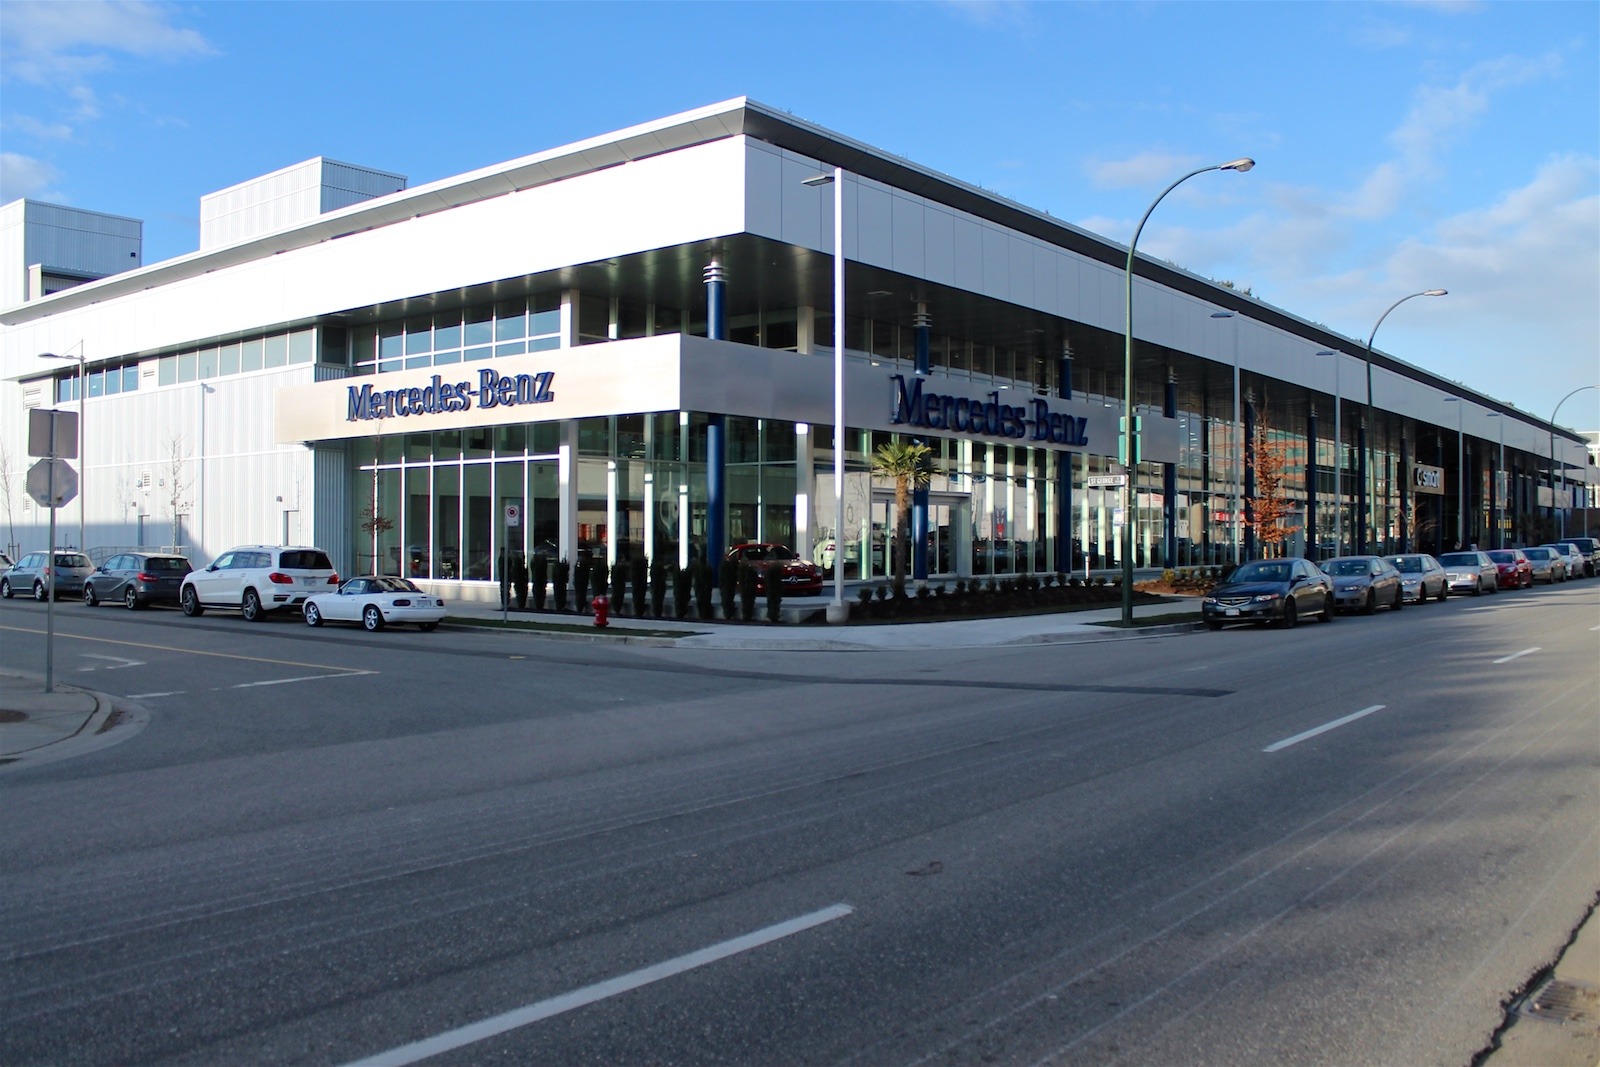 Robertson-Walls-Ceilings-Completed-Projects-Luxury-Car-Dealerships-Mercedes-Benz-Vancouver-2 Mercedes-Benz Vancouver